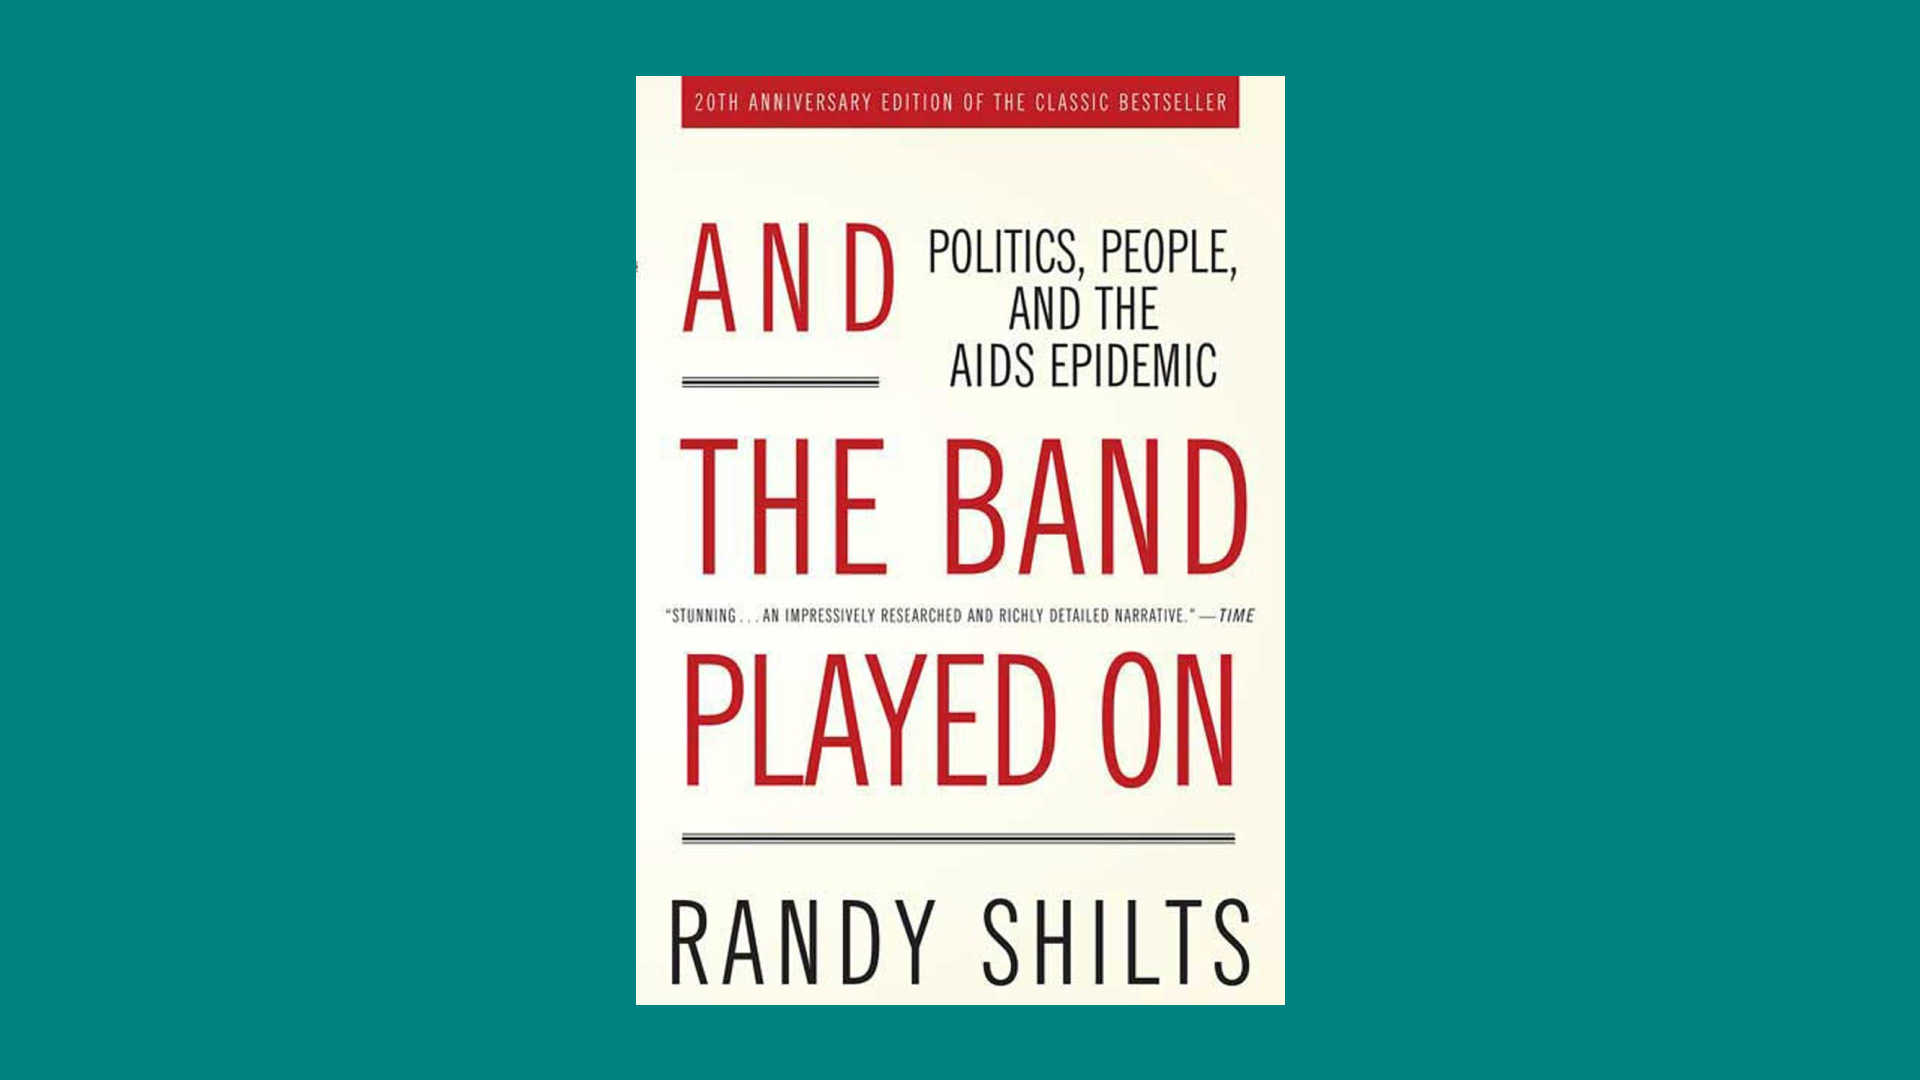 “And the Band Played On” by Randy Shilts  